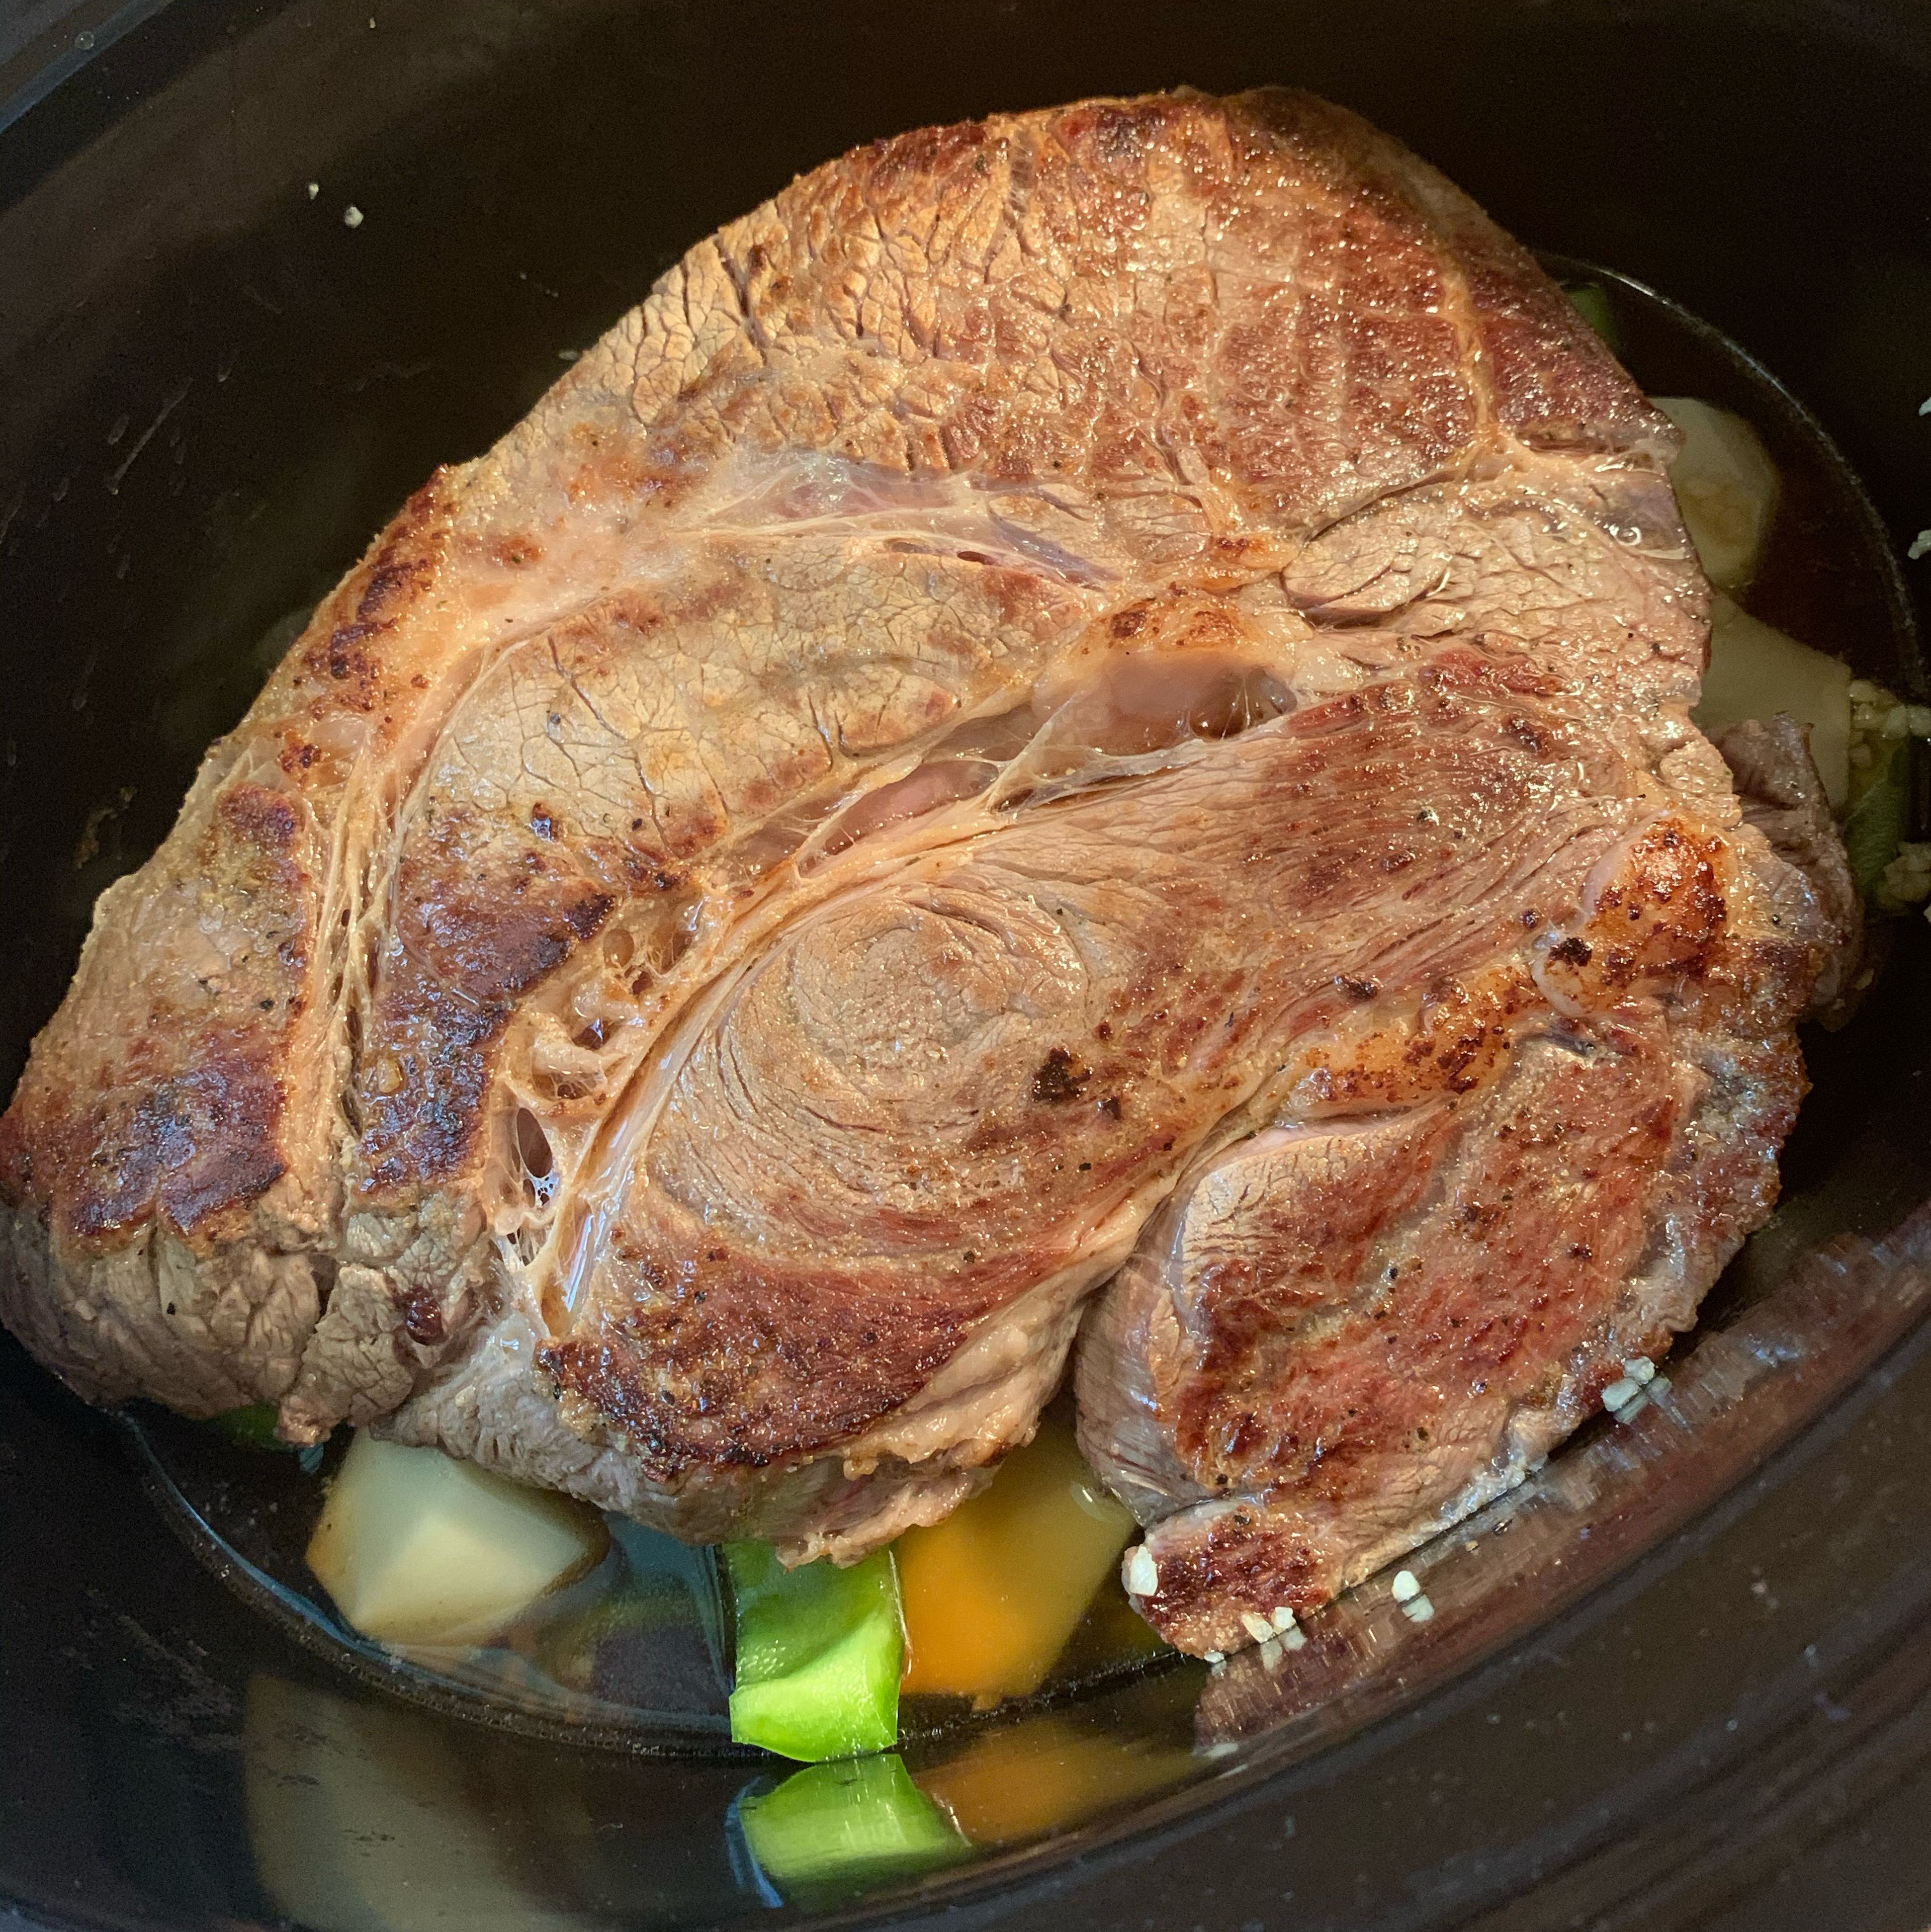 Take all of your veggies and place them in an even layer at the bottom of your crockpot. That will include potatoes, bell peppers, yellow onion, and minced garlic. Place your roast over the top of your veggie layer and pour 2 cups of beef broth over the entire roast. Place the lid on your slow cooker. Cook on high for 7-8 hours or on low for 5-6 hours.